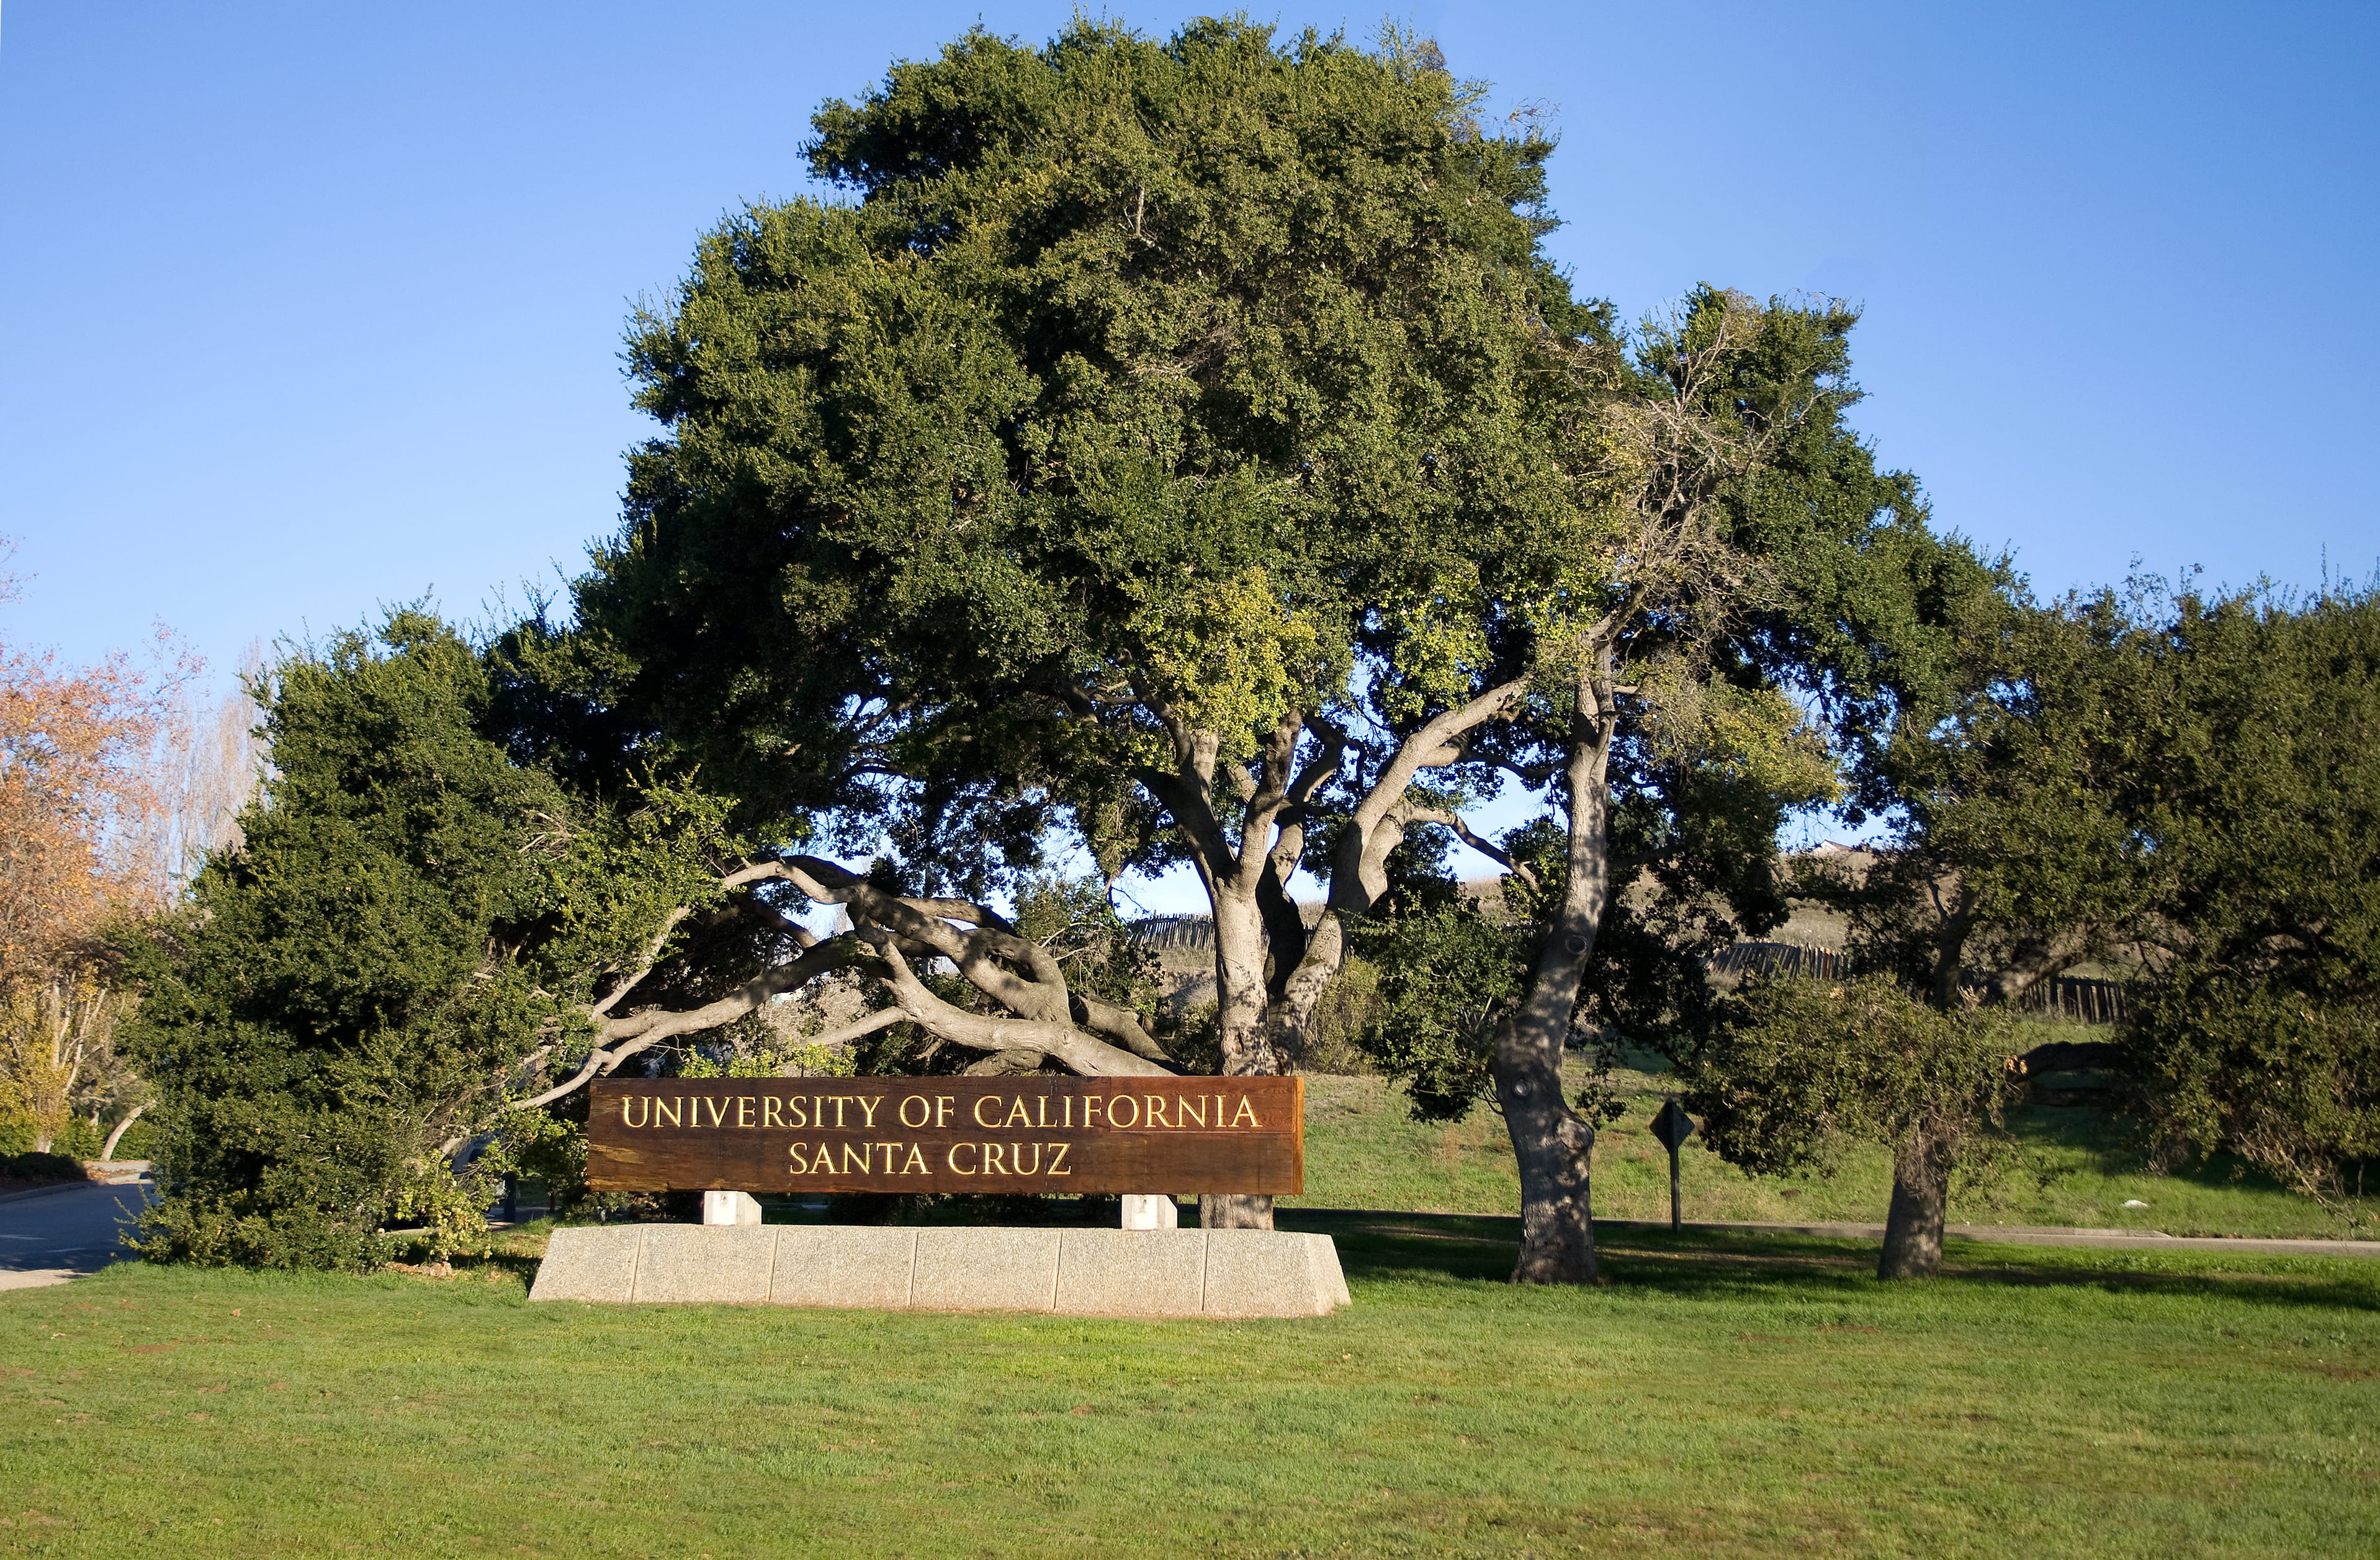 UCSC campus entrance sign with tree in background